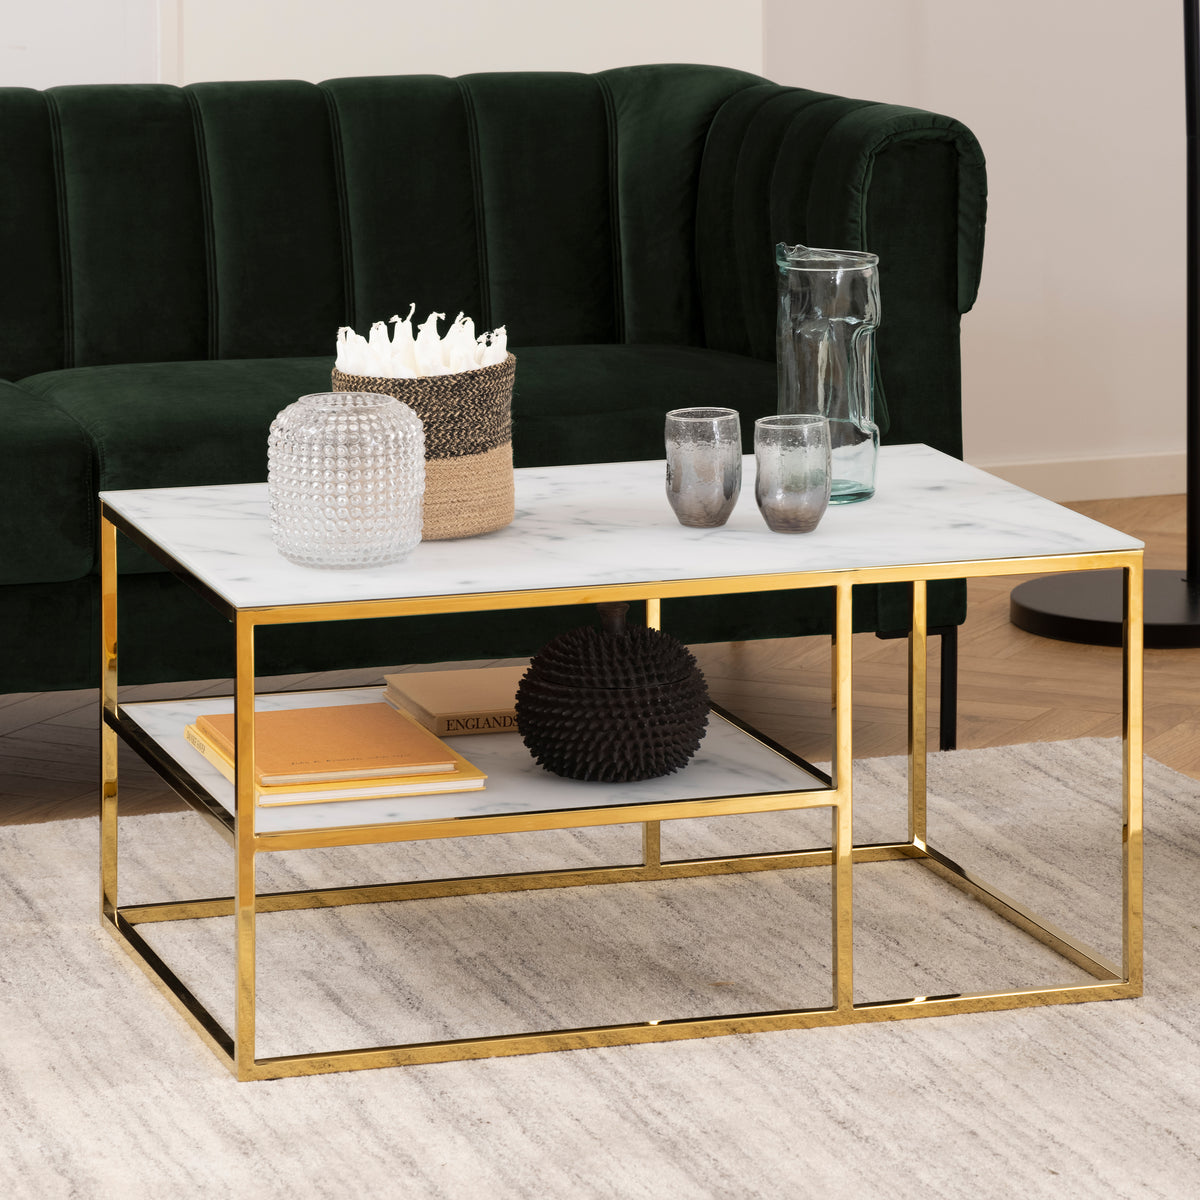 Alisma Open Shelf Coffee Table with White Marble Effect & Gold Legs